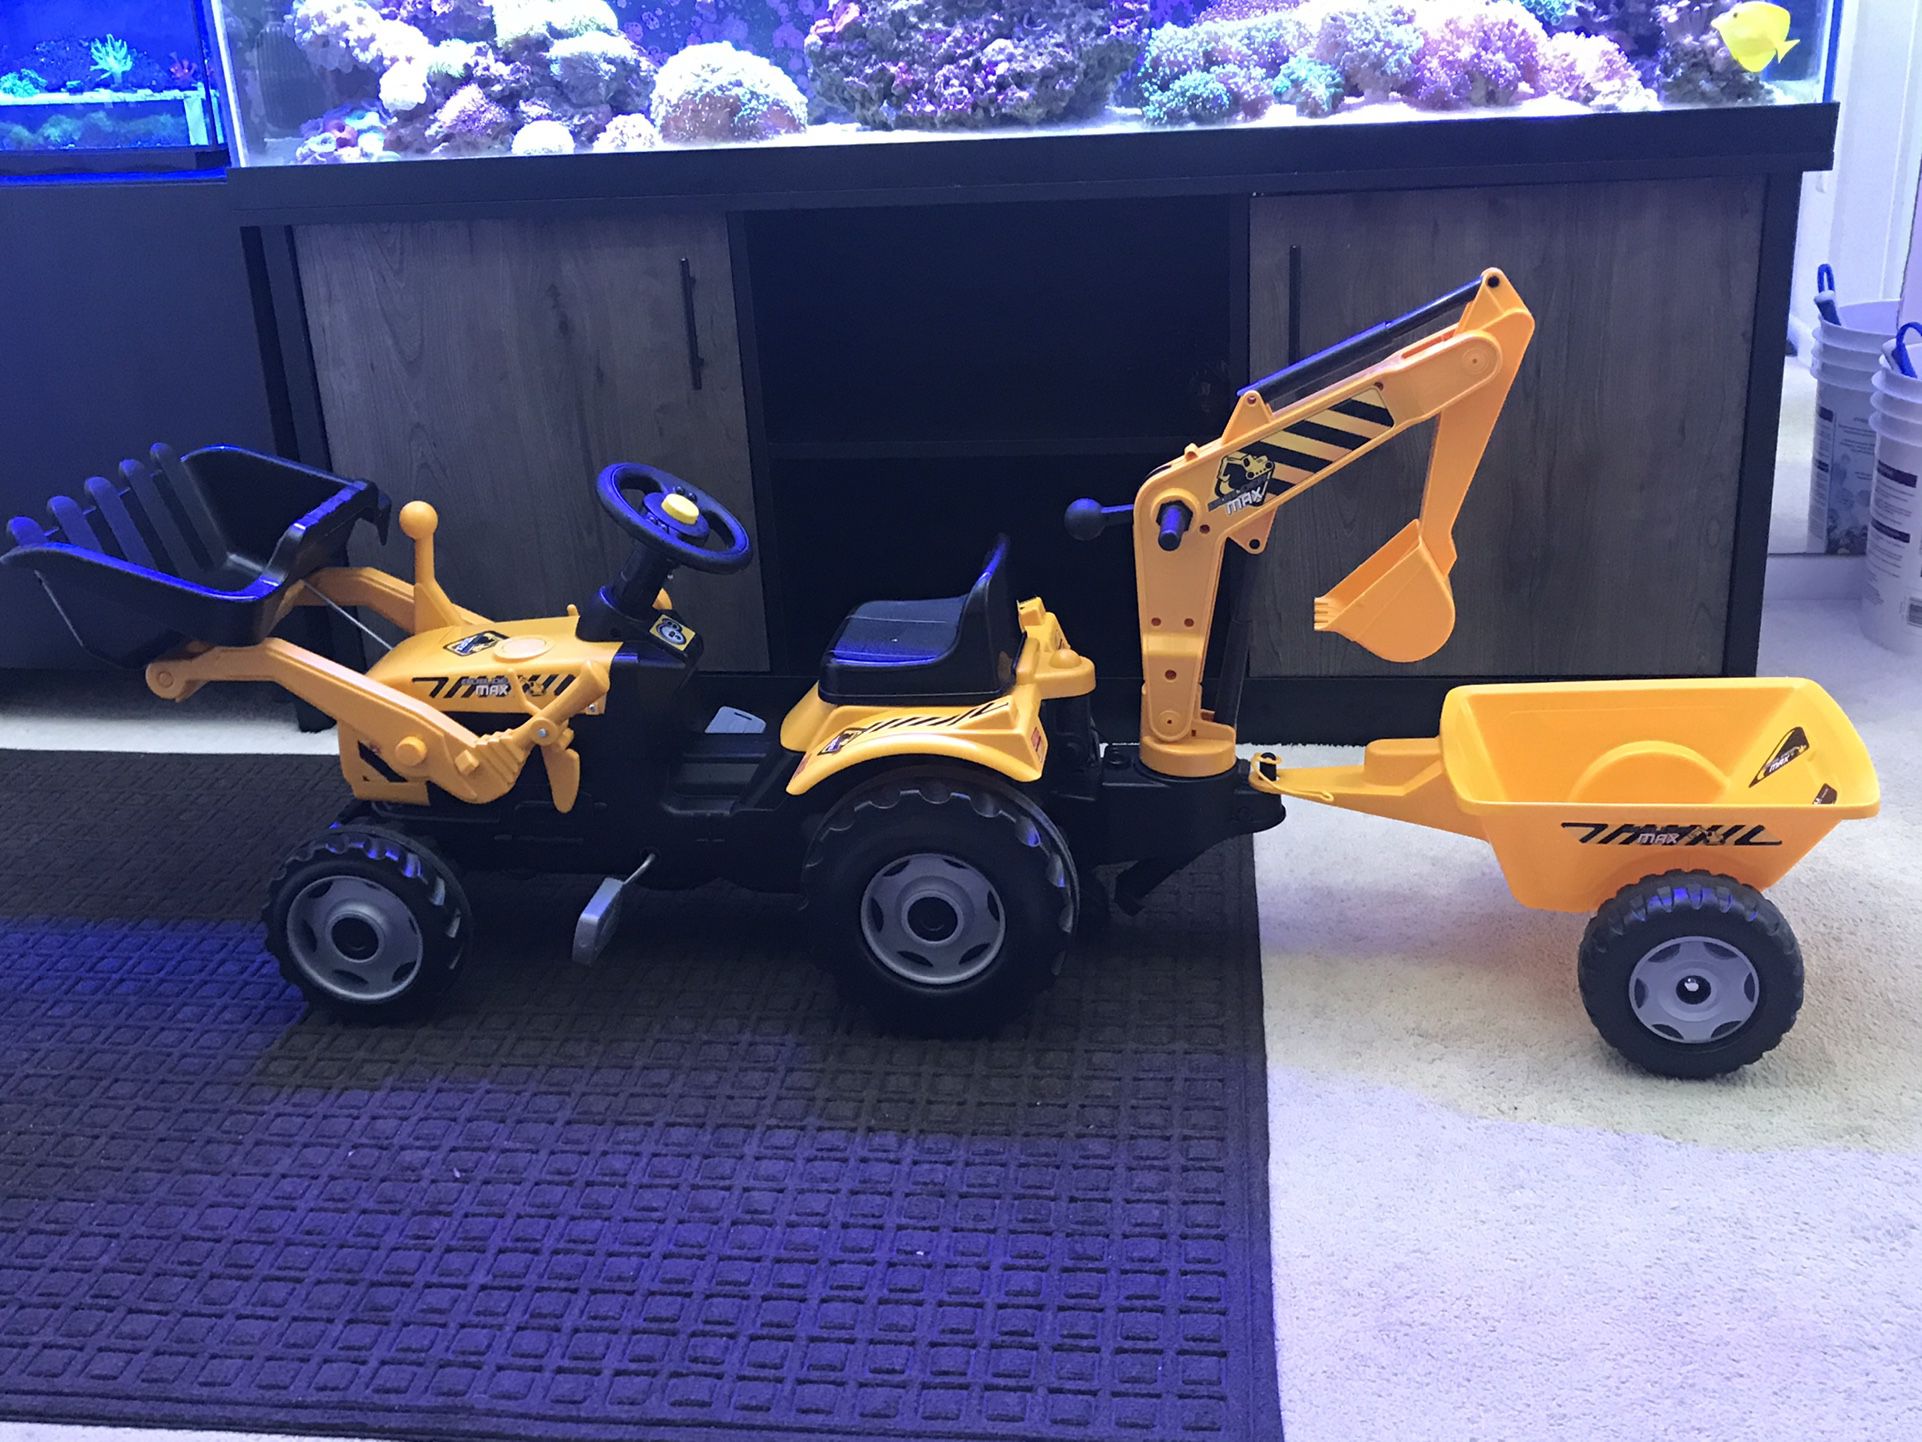 Kids Pedal Ride on Toy Construction with Backhoe and Front Loader / Max Builder Tractor and Trailer